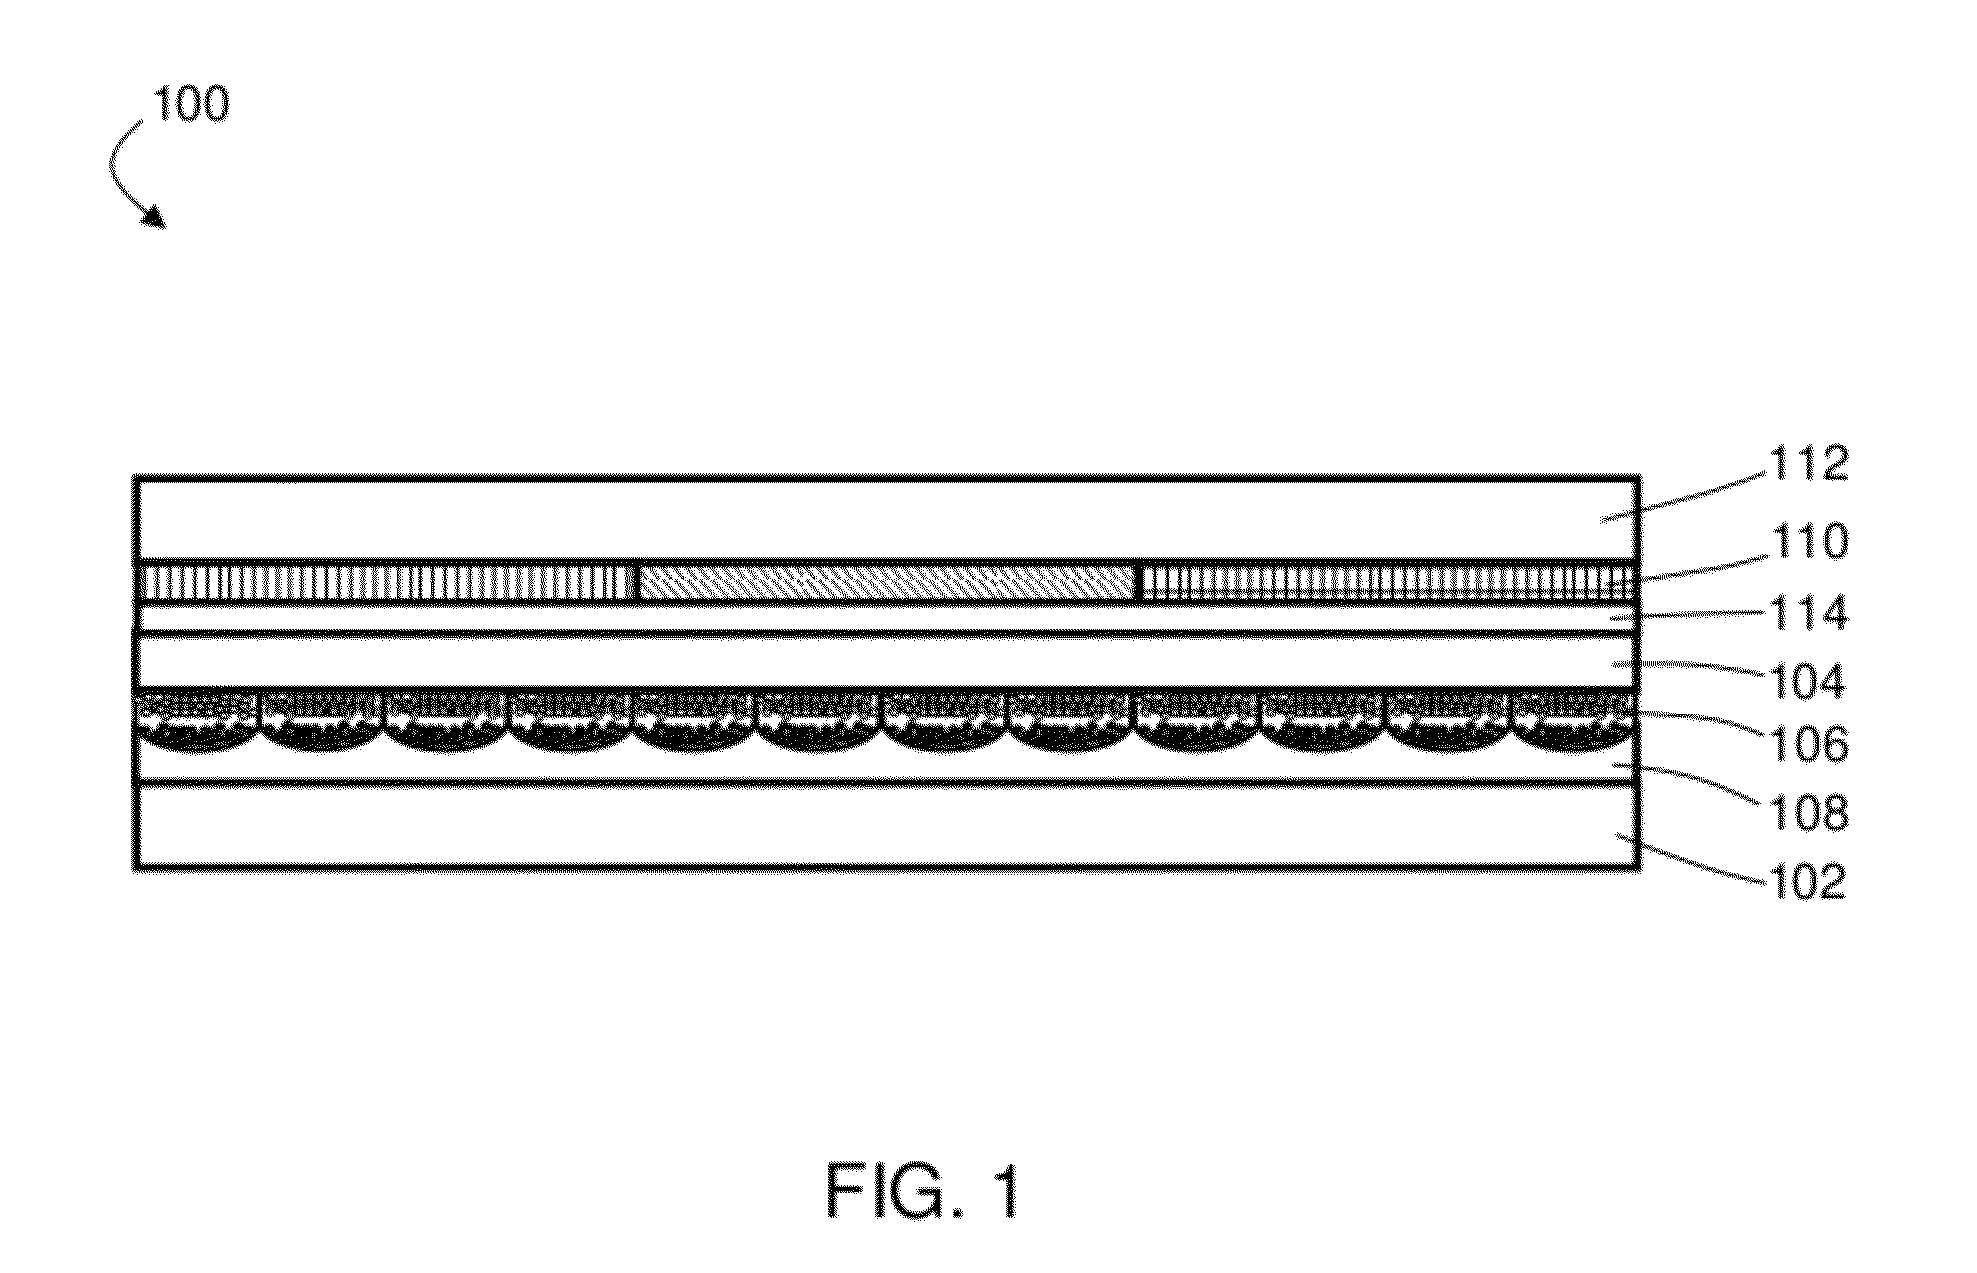 Tetrachromatic color filter array for reflective display